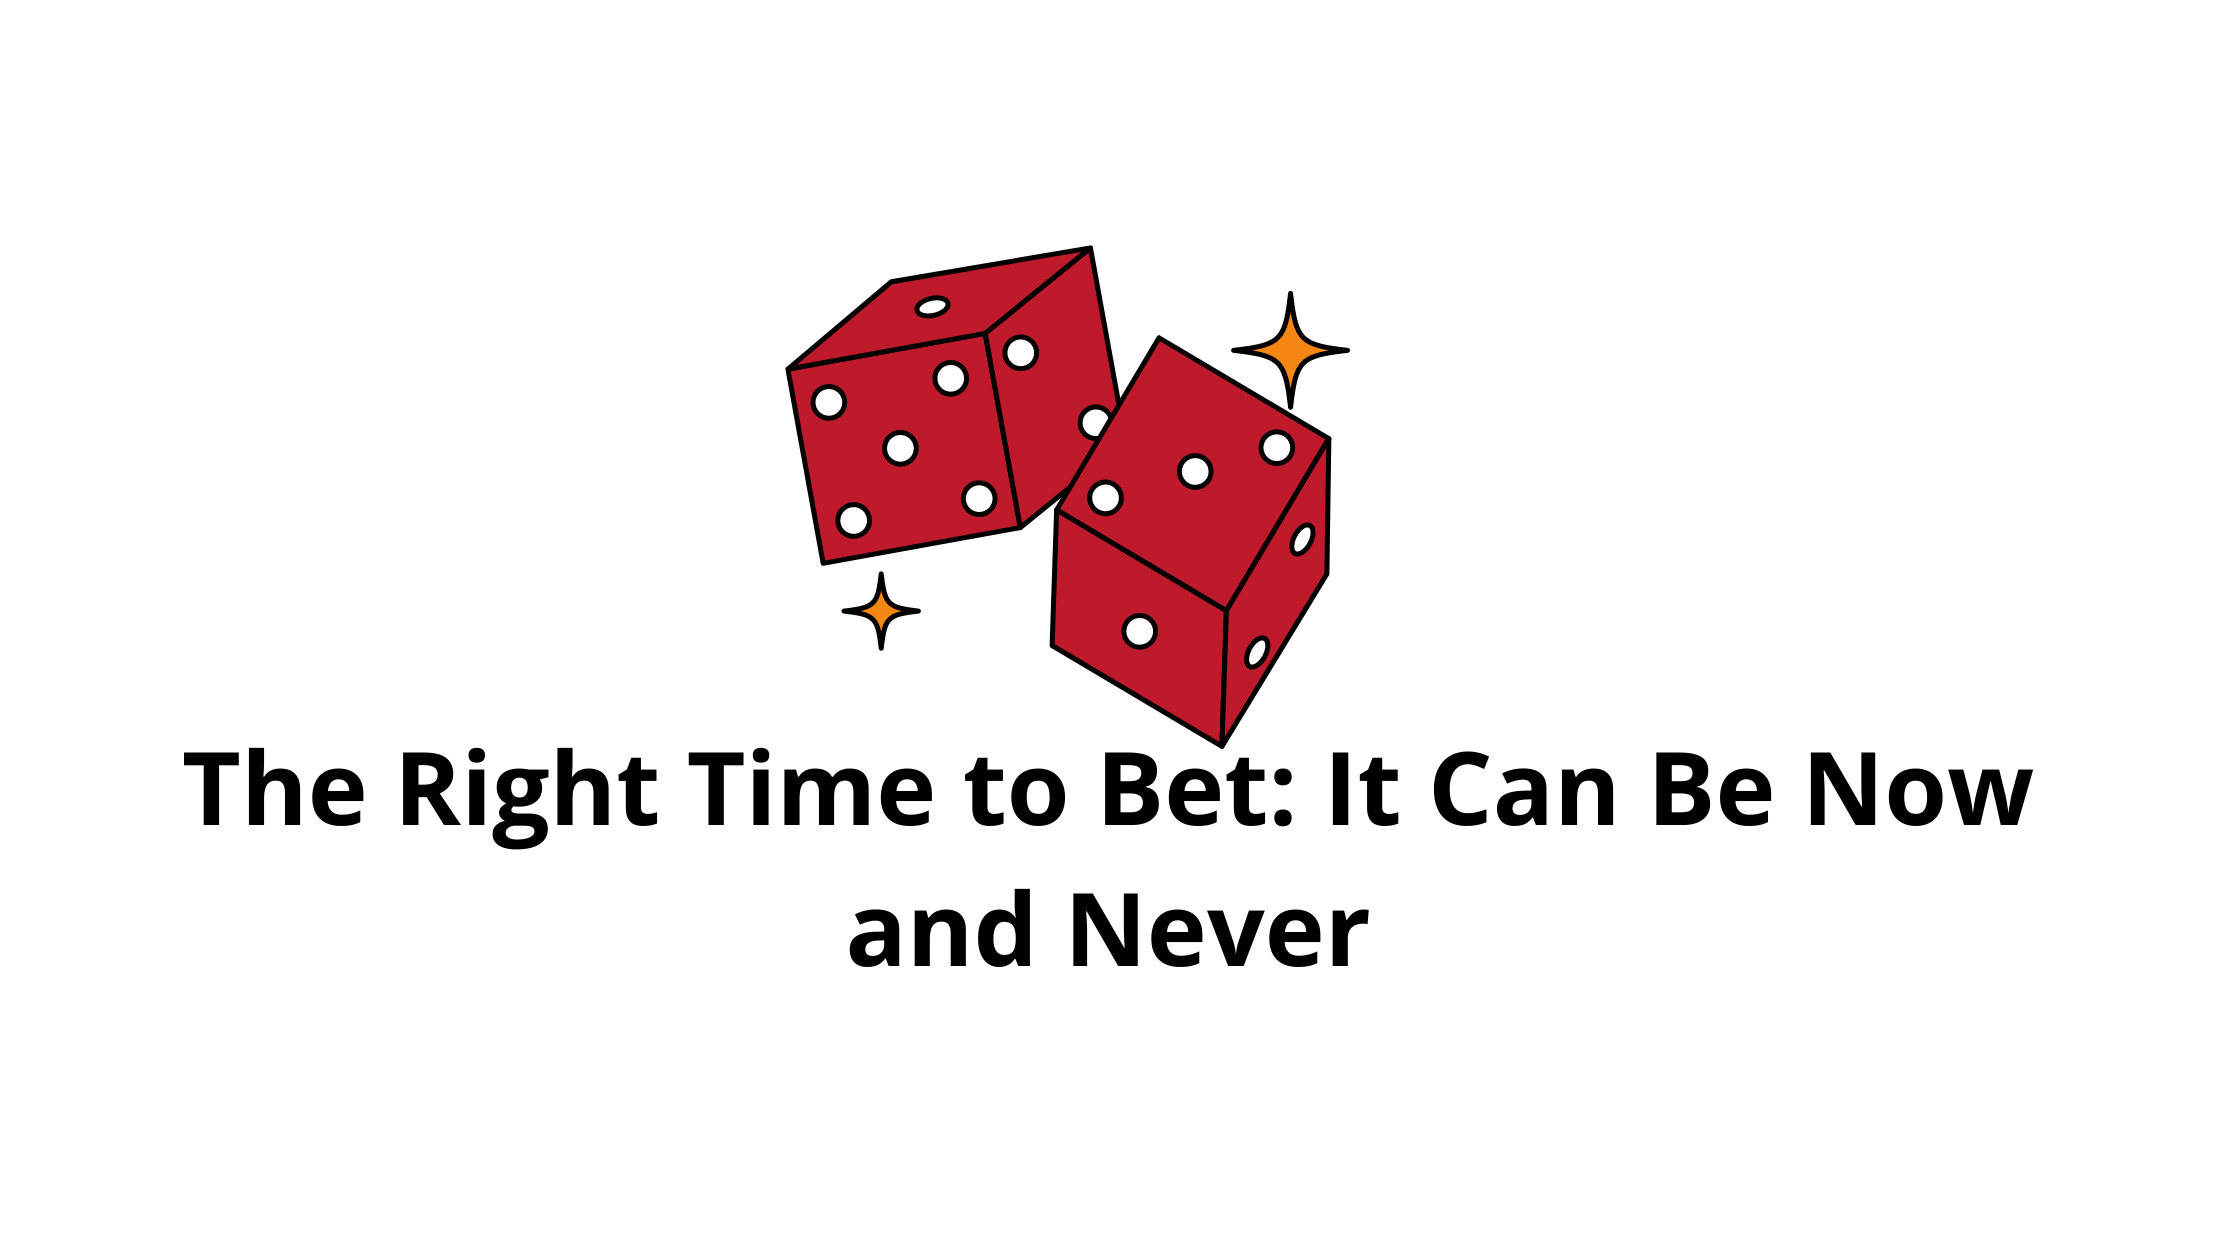 The Right Time to Bet: It Can Be Now and Never